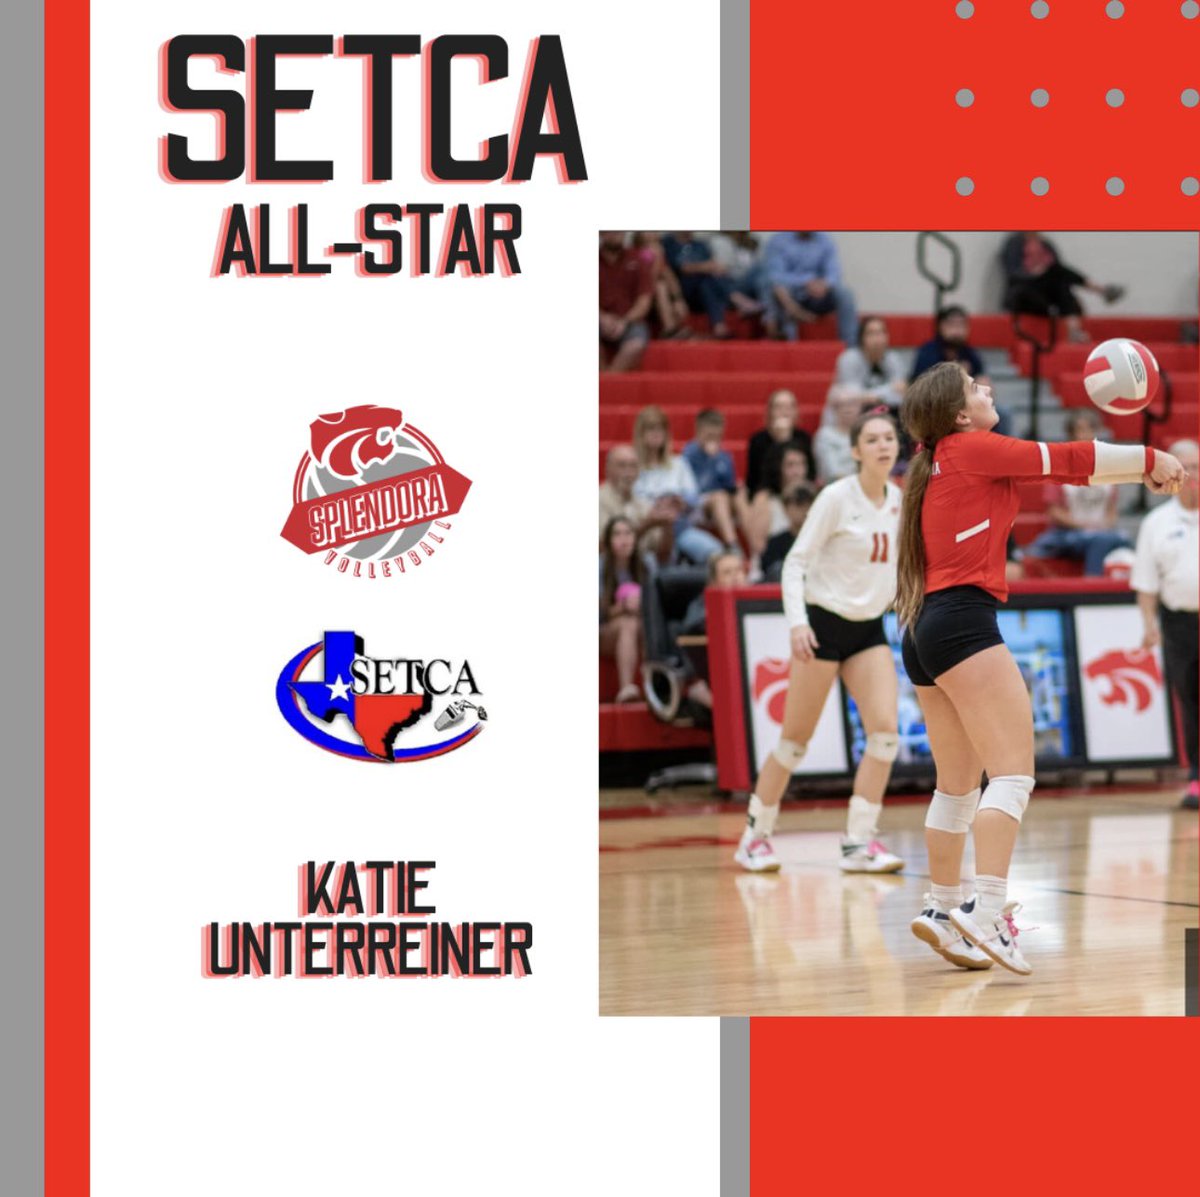 Congratulations to Katie Unterreiner for being selected for the SETCA All-Star Team‼️